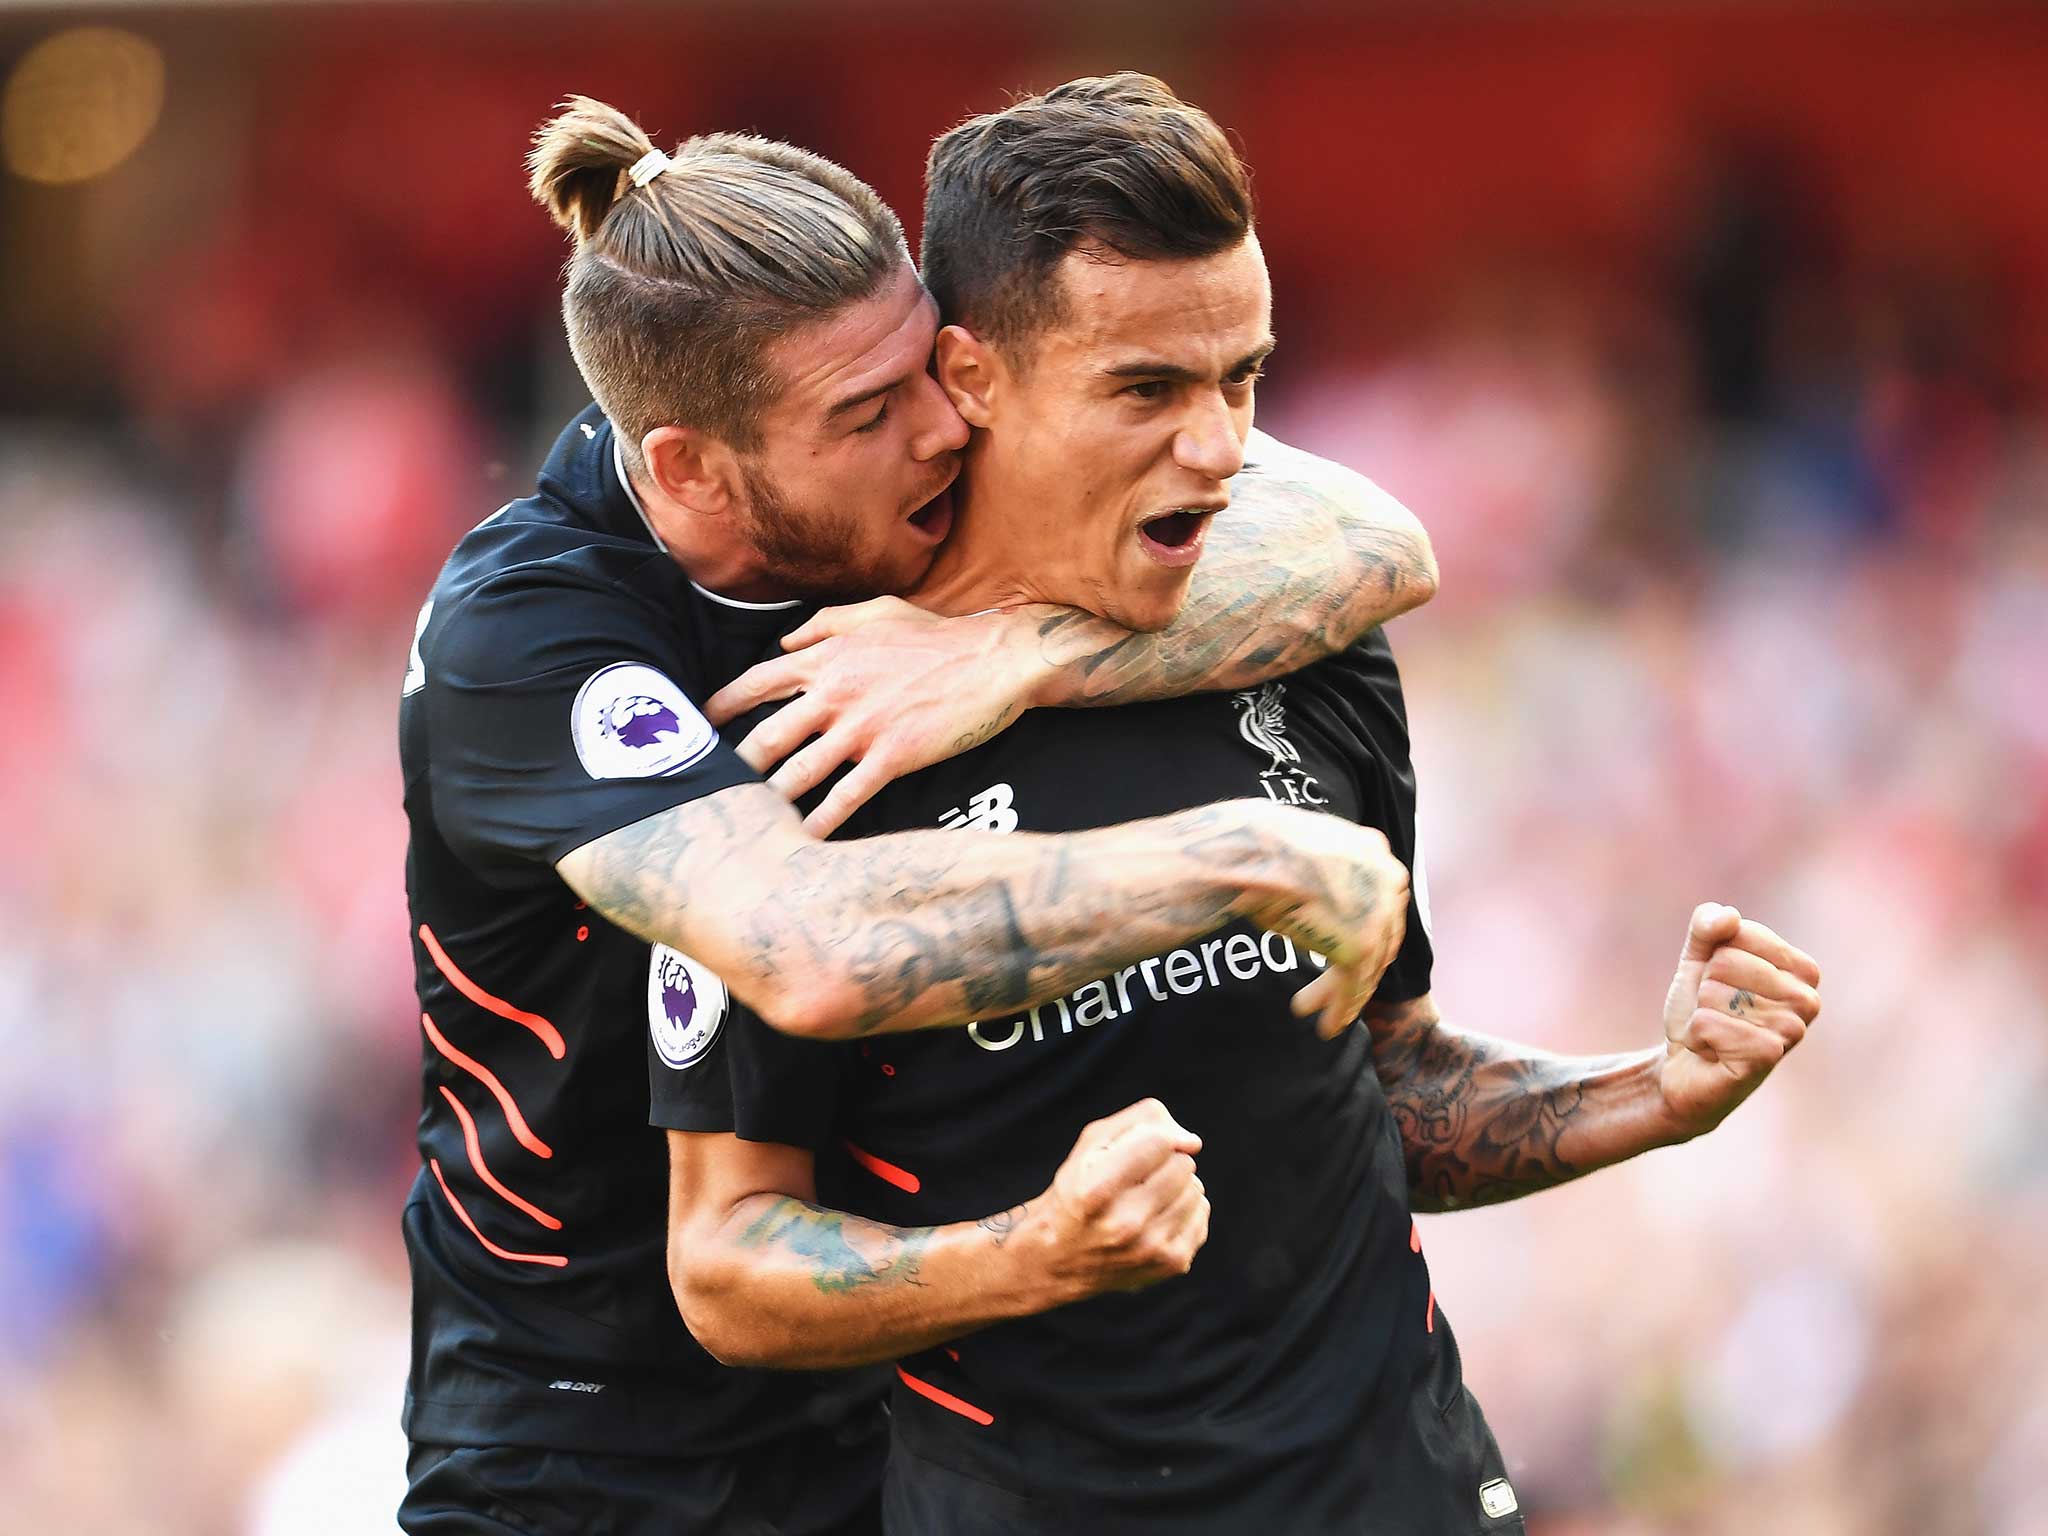 Philippe Coutinho showed his very best against Arsenal last weekend